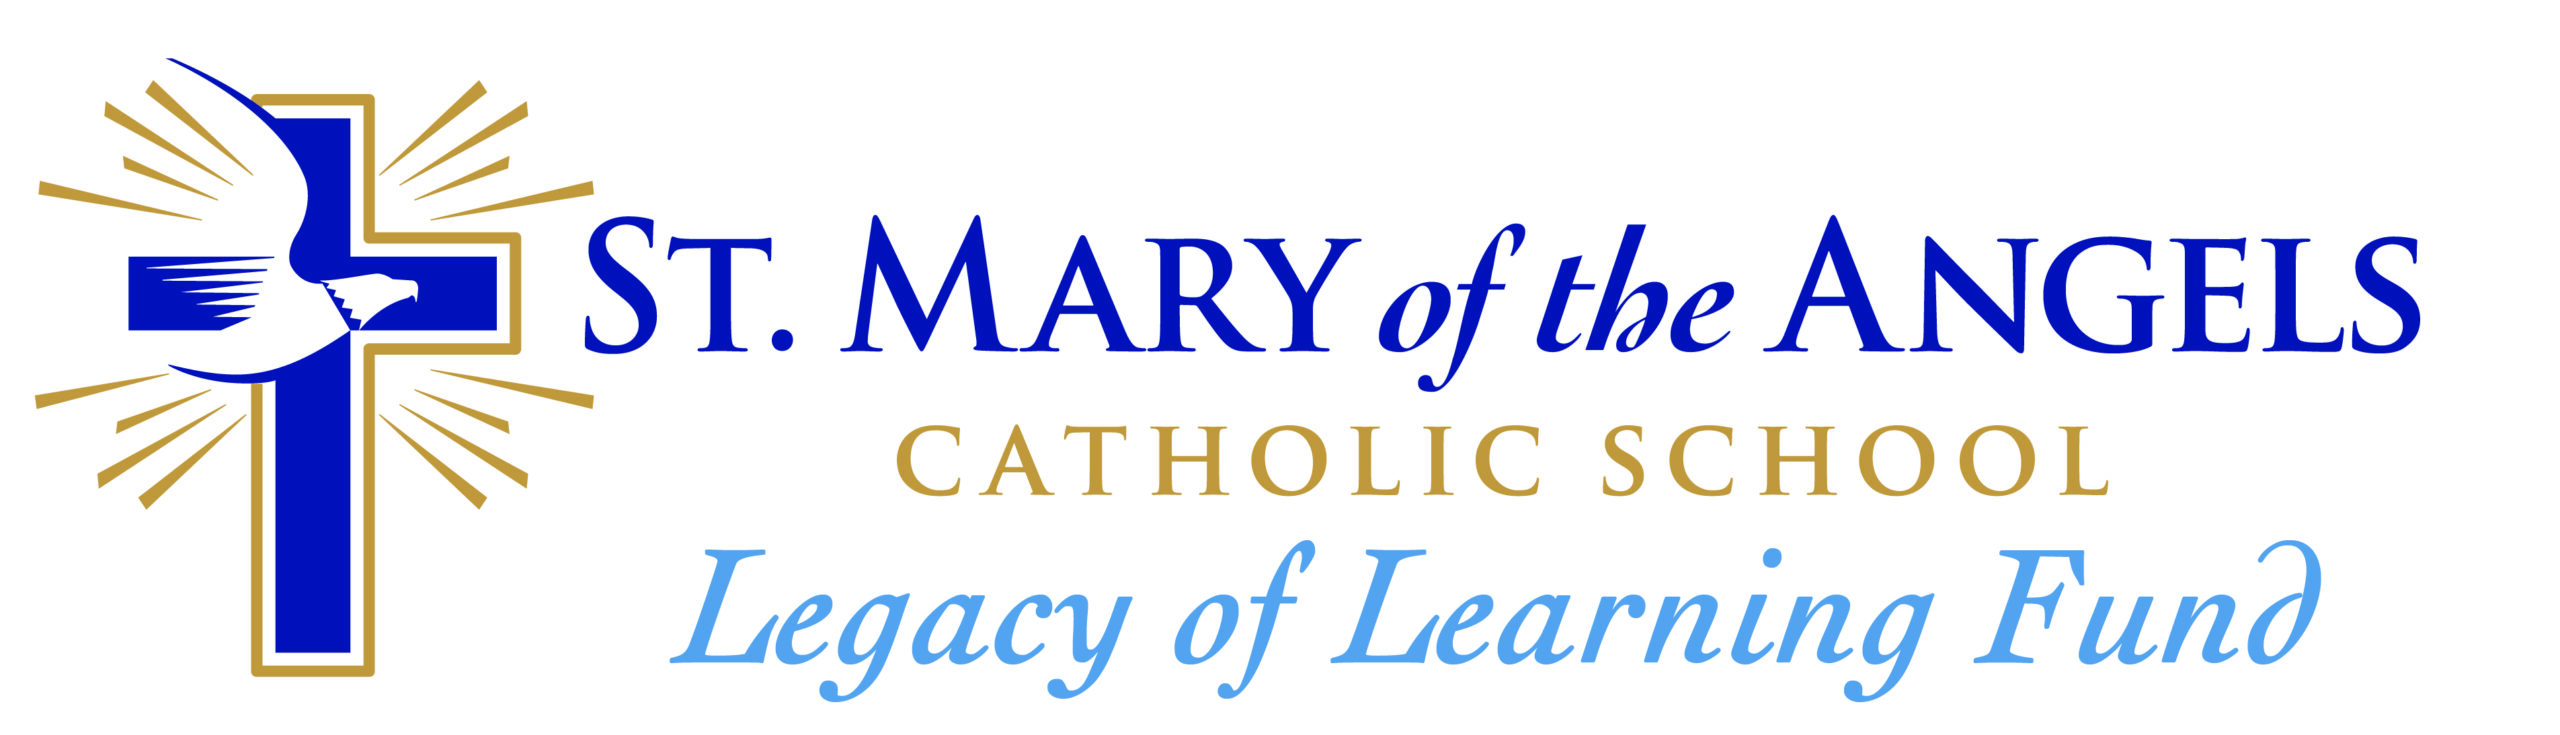 St. Mary of the Angels Catholic School Legacy of Learning Fund Logo.